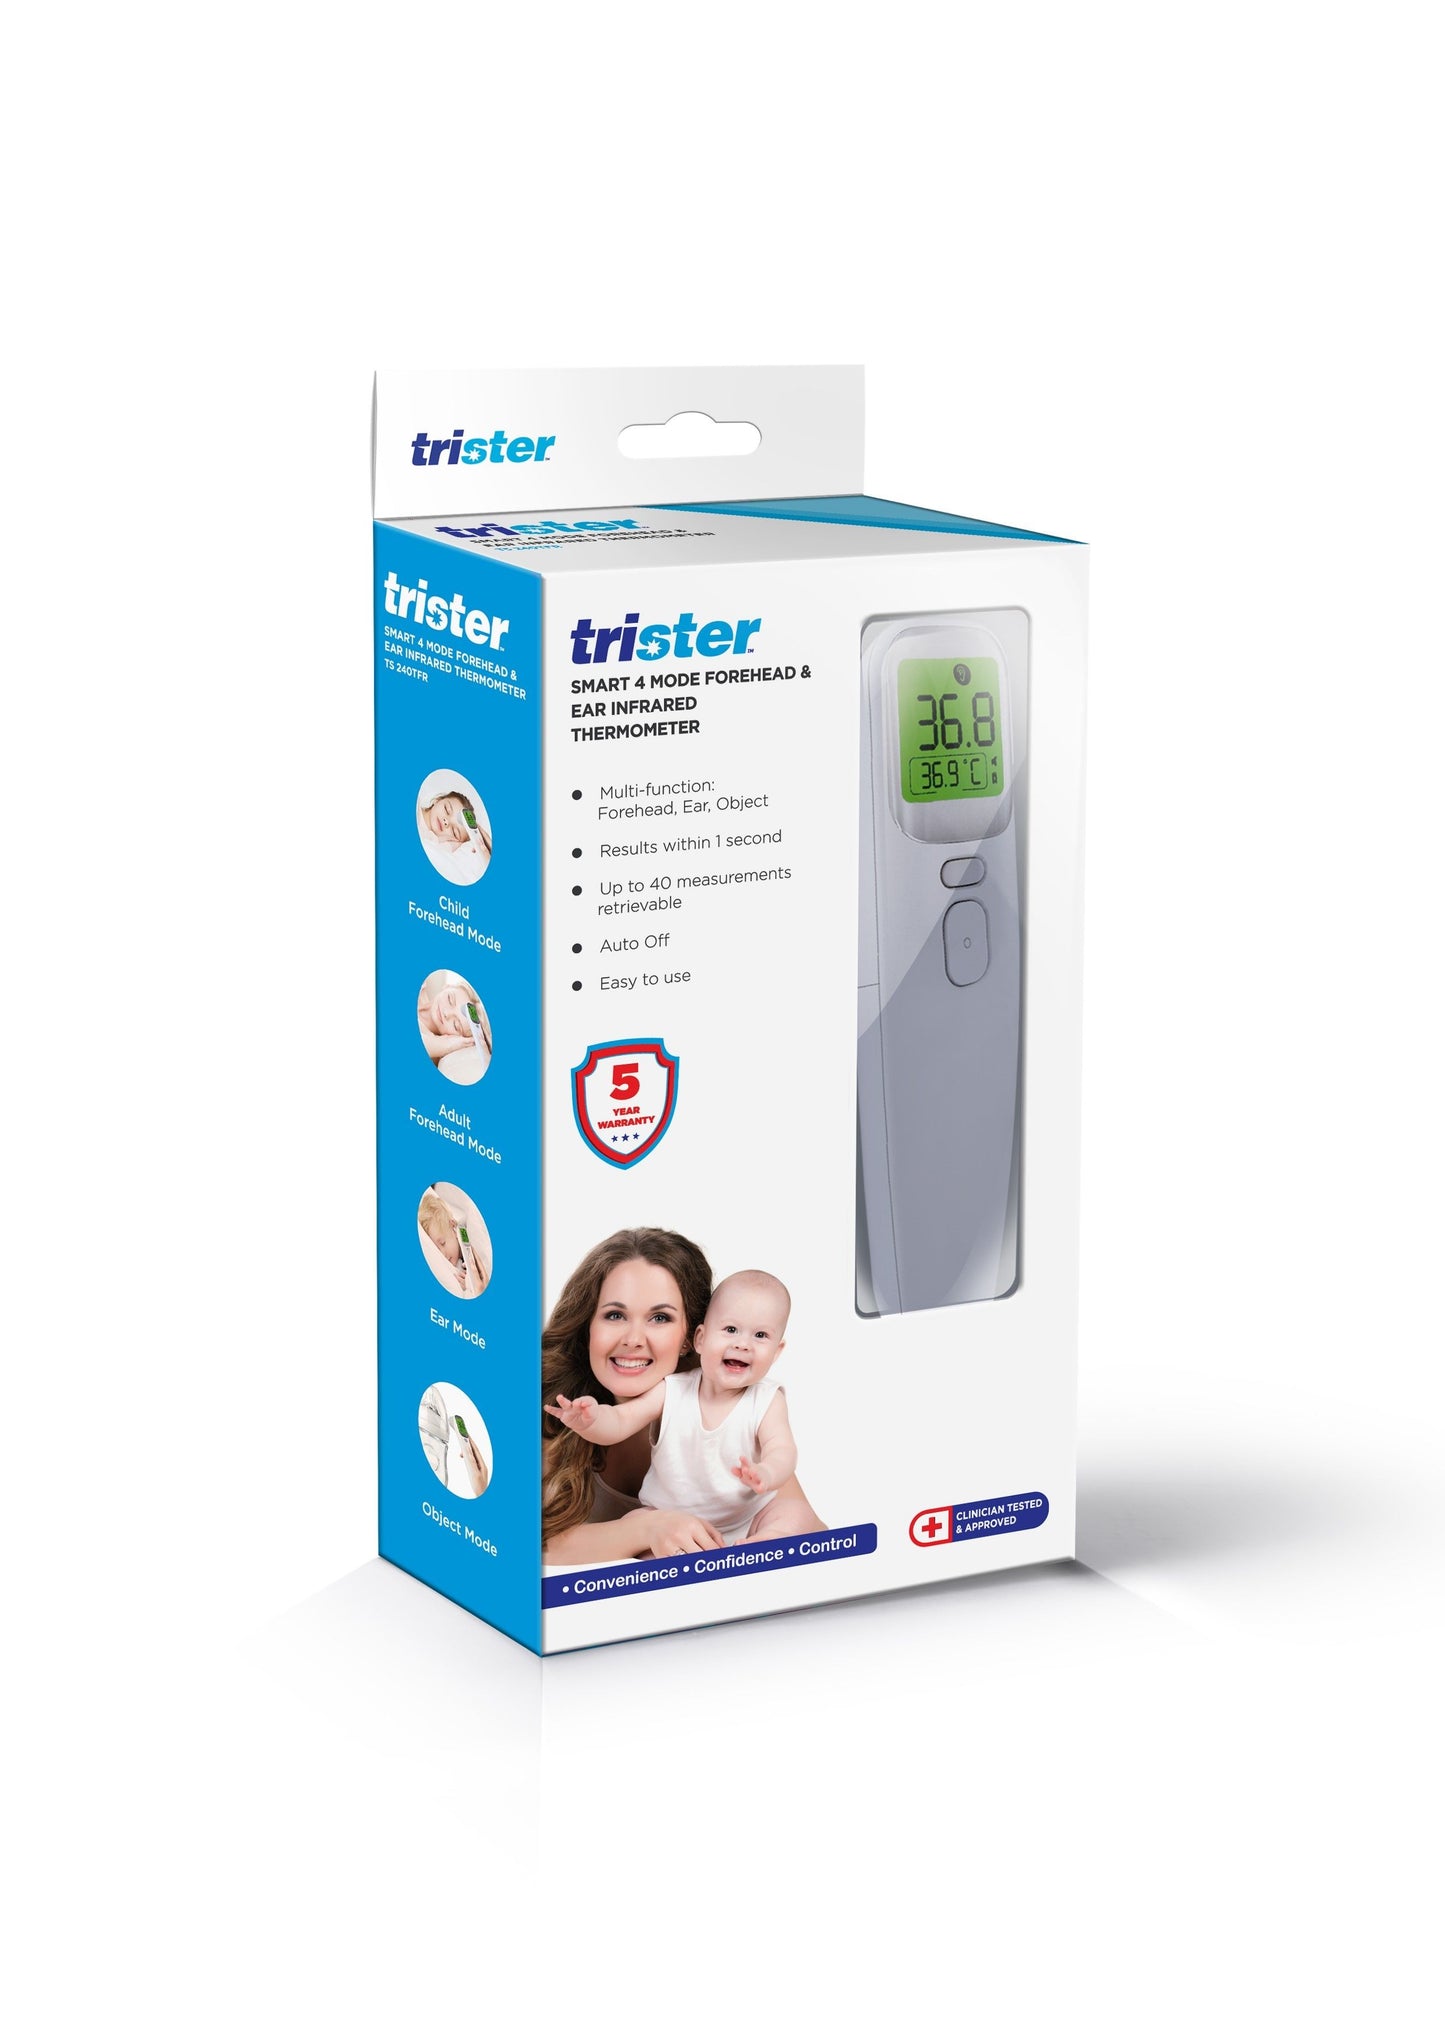 Trister Smart 4 Mode Forehead & Ear Infrared Thermometer